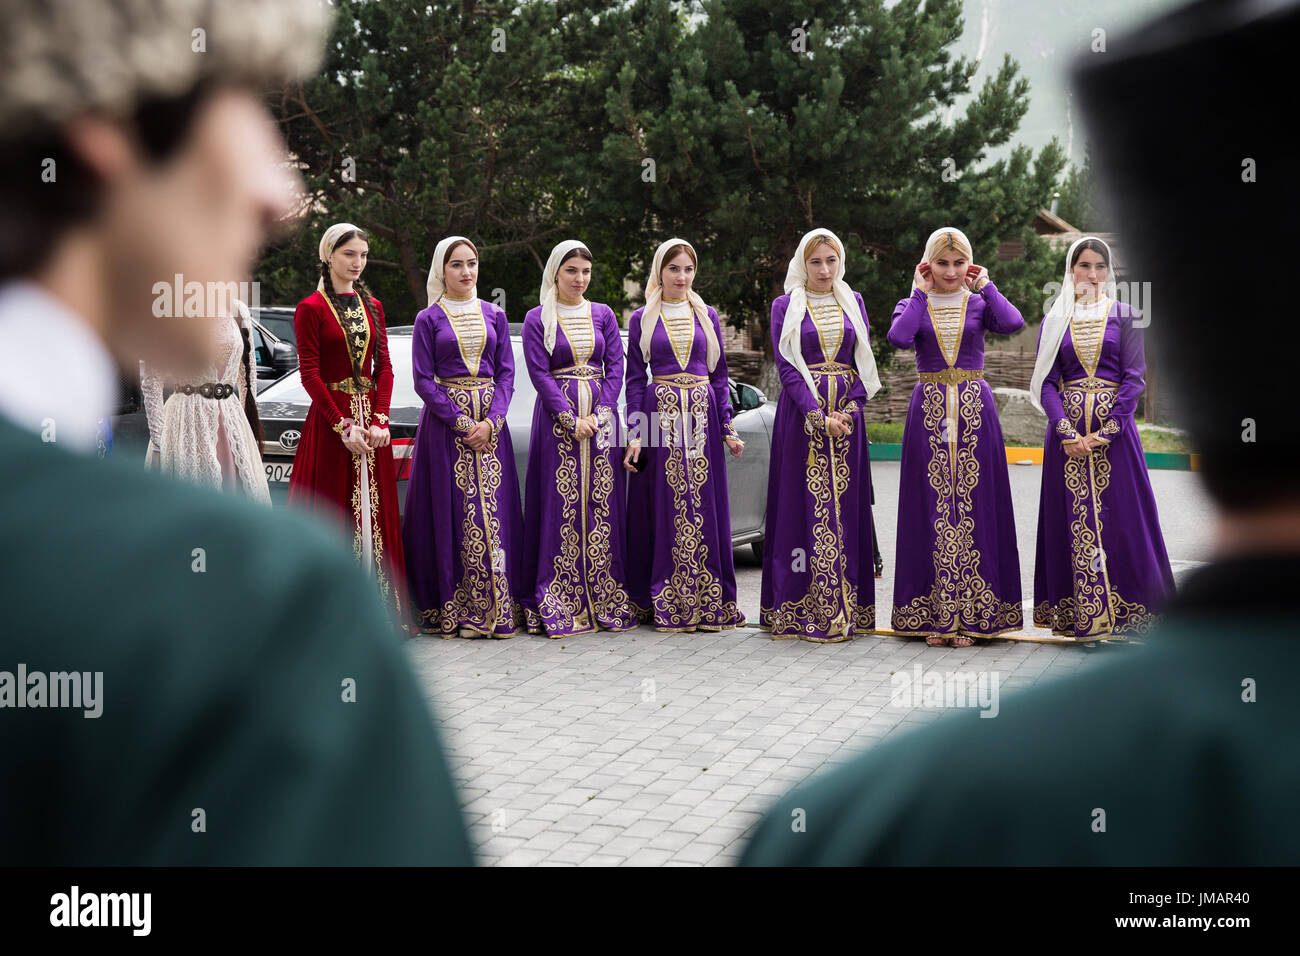 Chechnya, Russia. 25th July, 2017. Girls line up to welcome guests in Vedensky District, Chechnya, Russia, July 25, 2017. Credit: Bai Xueqi/Xinhua/Alamy Live News Stock Photo